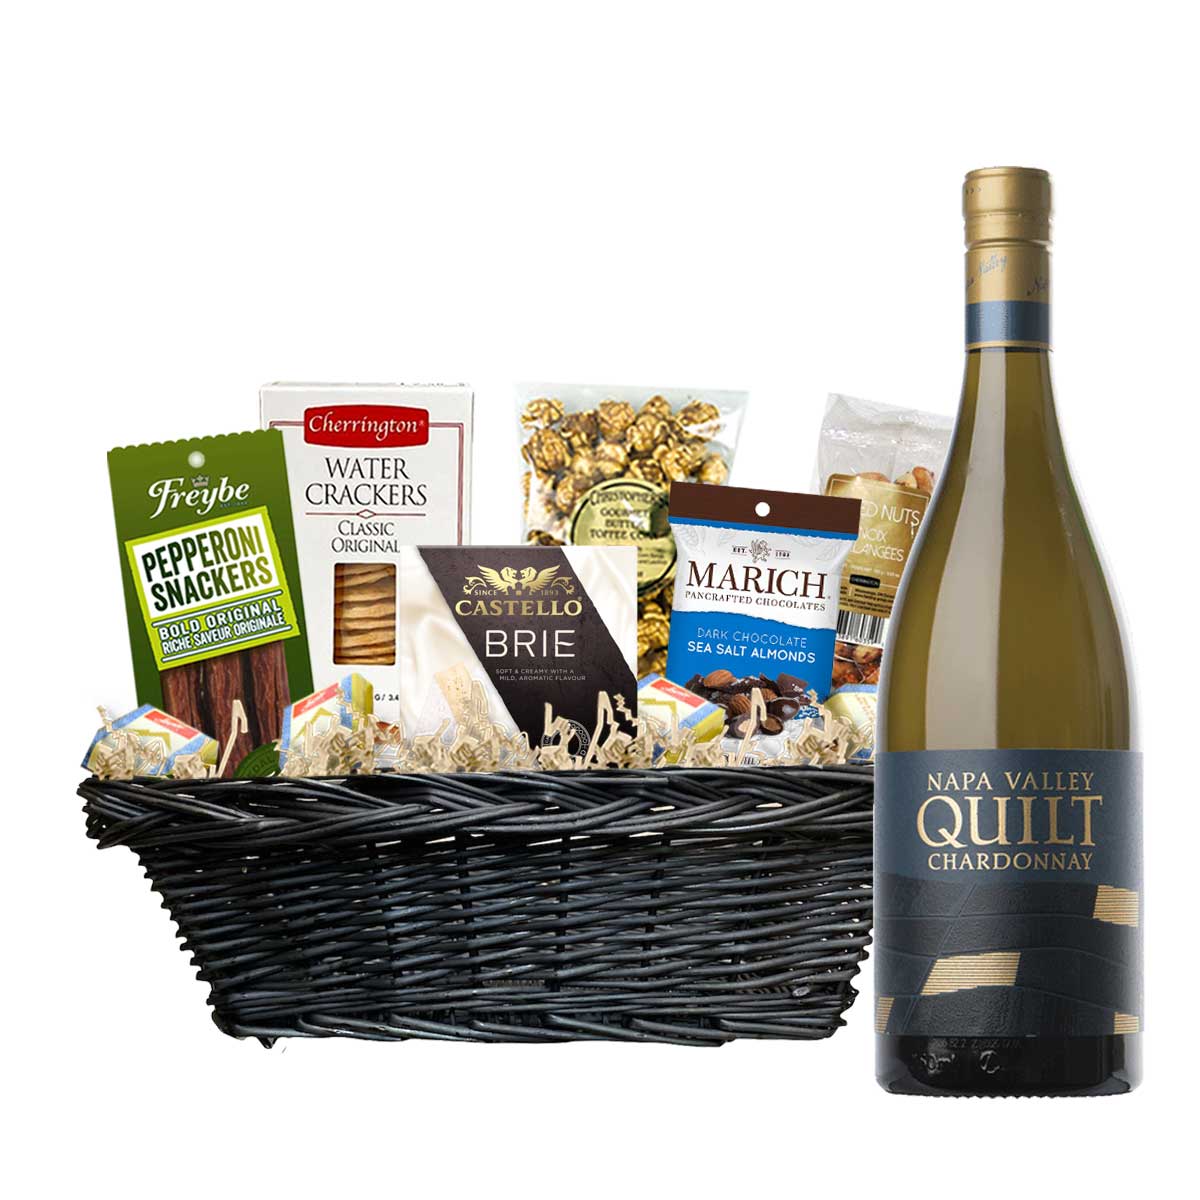 TAG Liquor Stores Canada Delivery-Quilt Chardonnay 750ml Corporate Gift Basket-wine-tagliquorstores.com